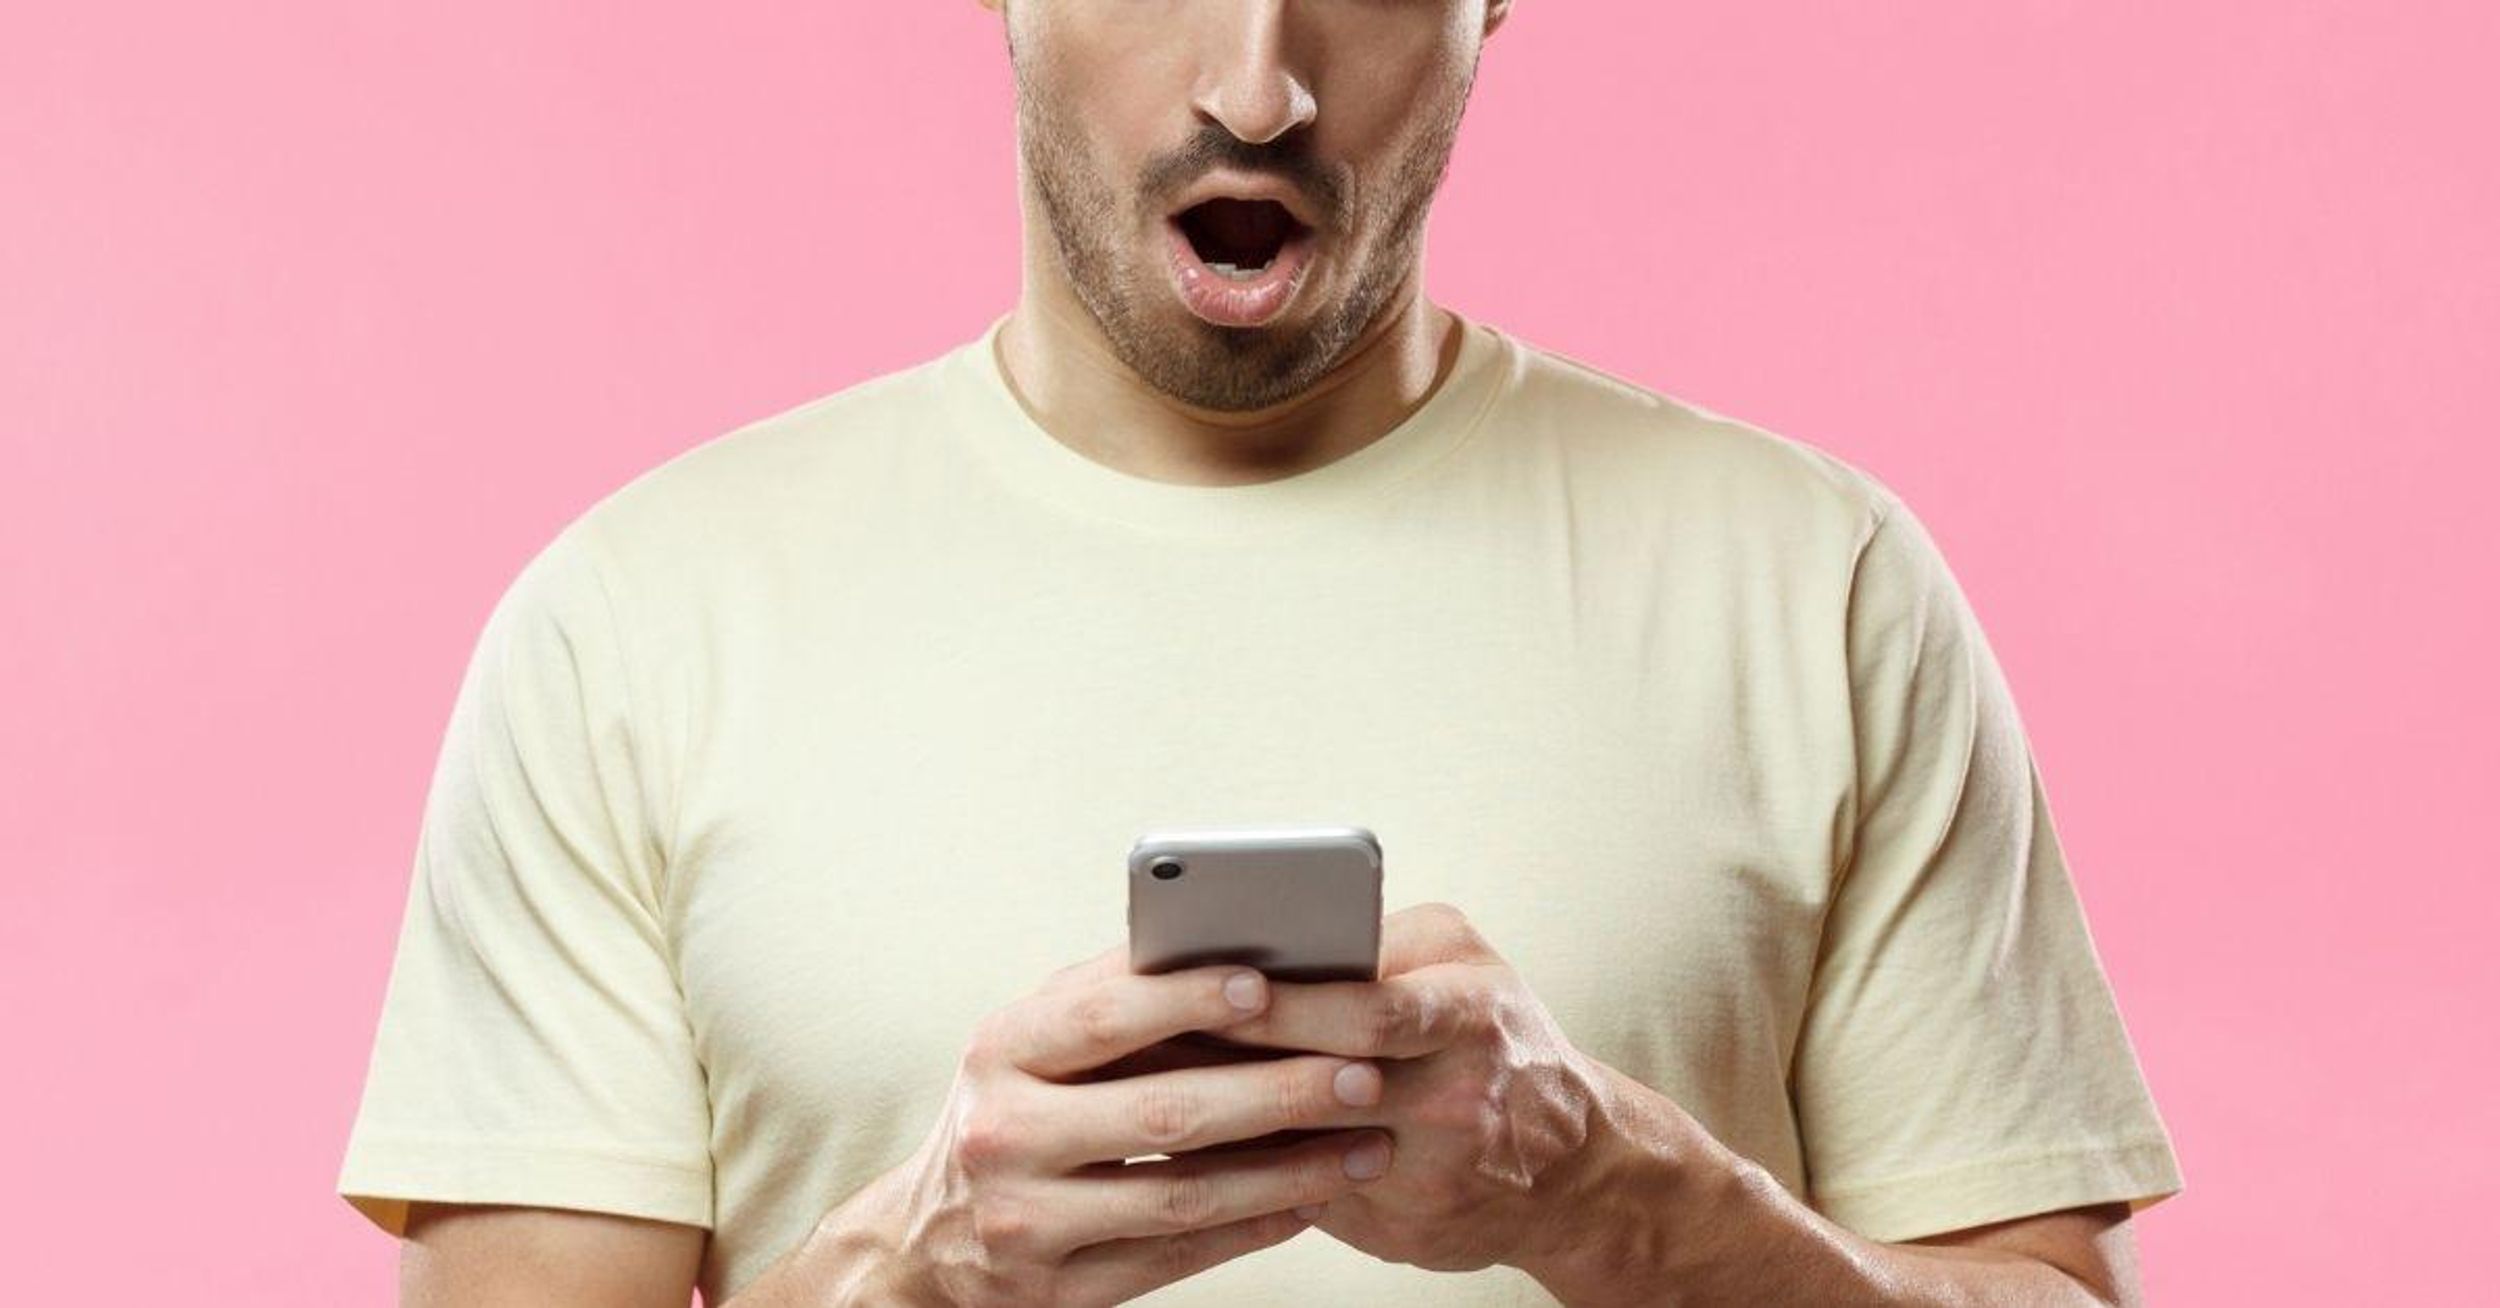 Gay Guy Stunned When Father Seems To Suggest He Find A Sugar Daddy In Hilarious Text Exchange